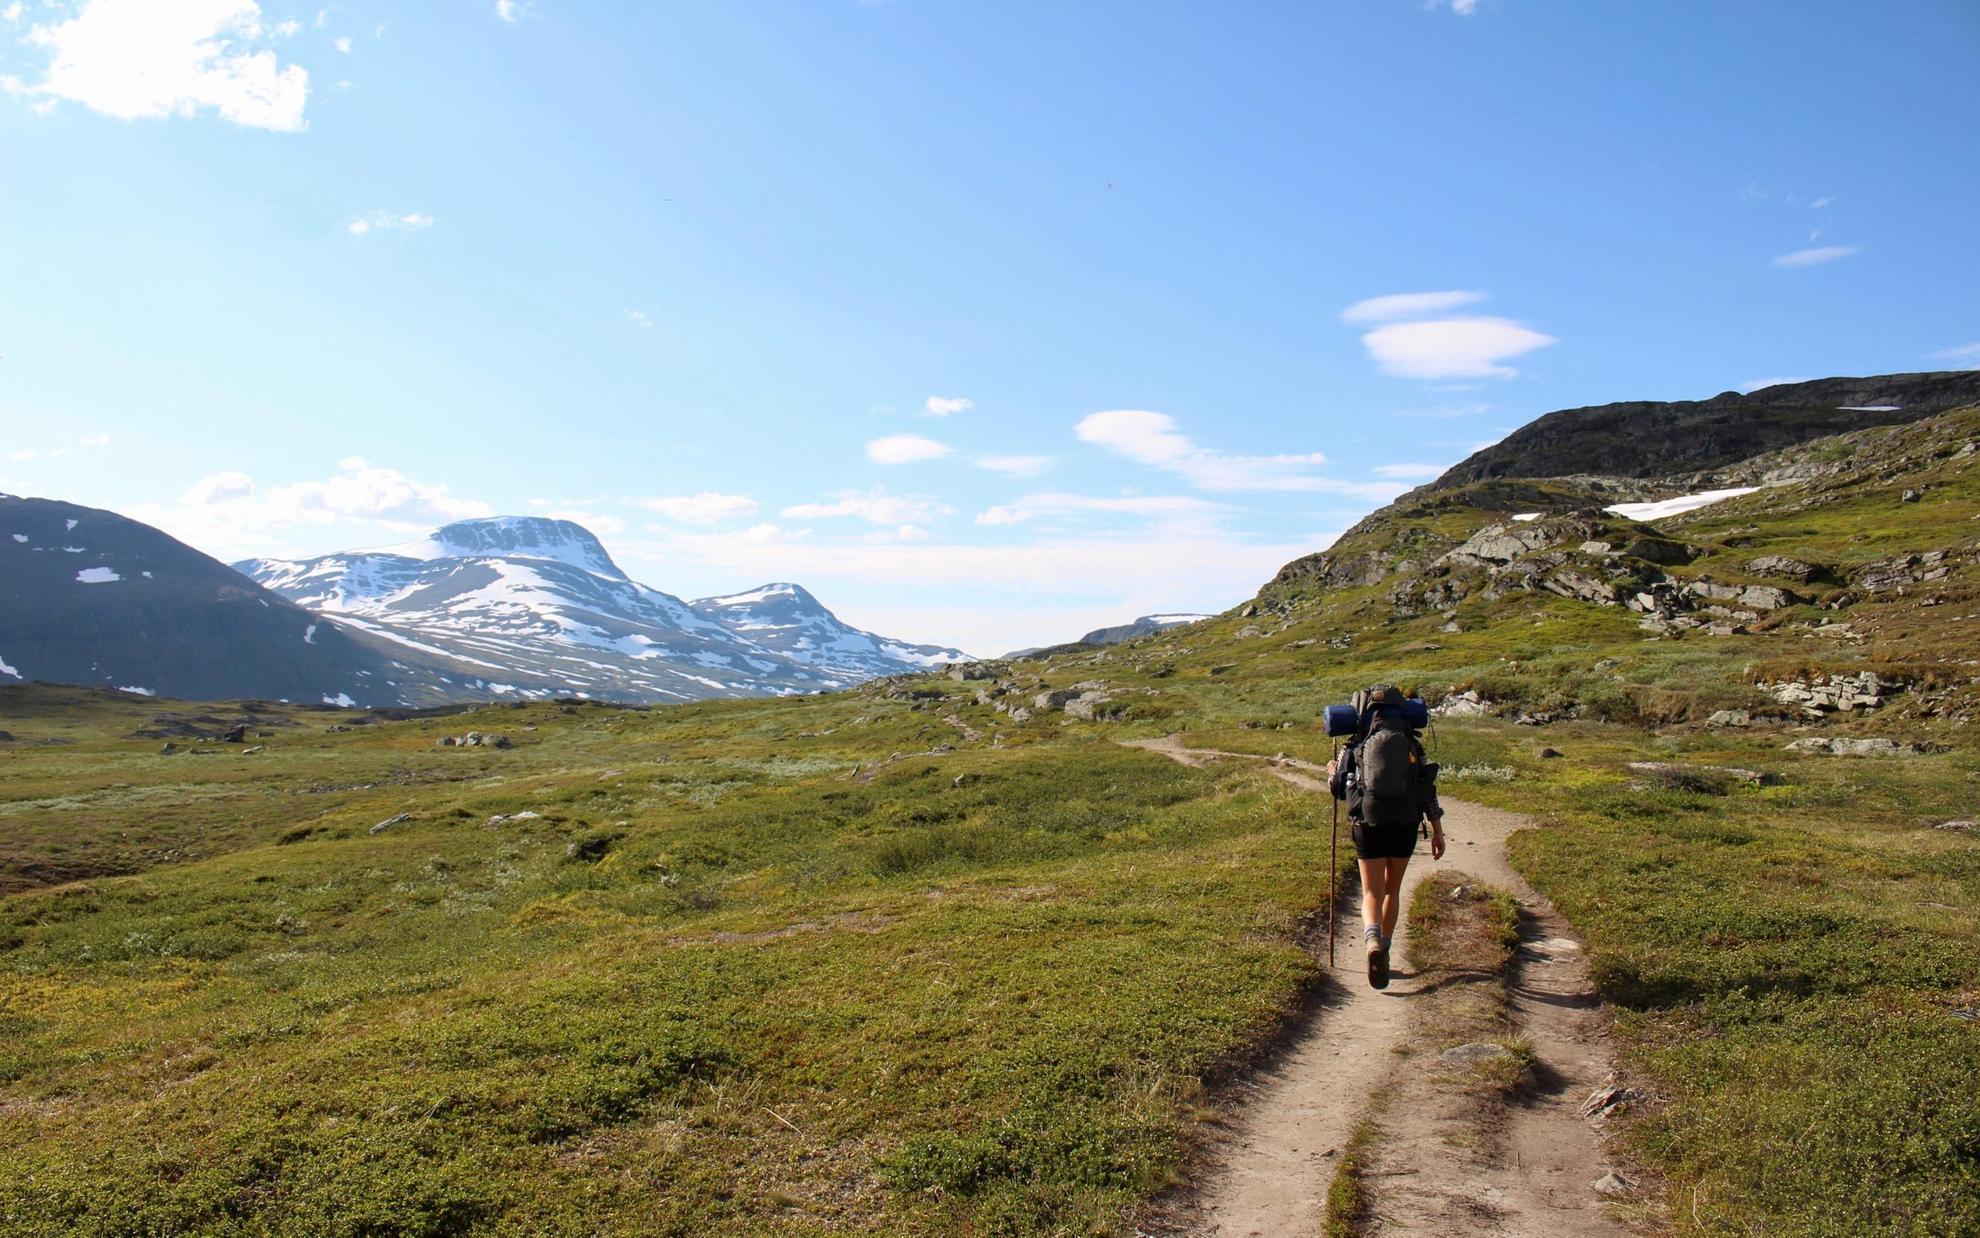 A lone hiker with a large backpack, on a trail surrounded by mountains in Swedish Lapland.